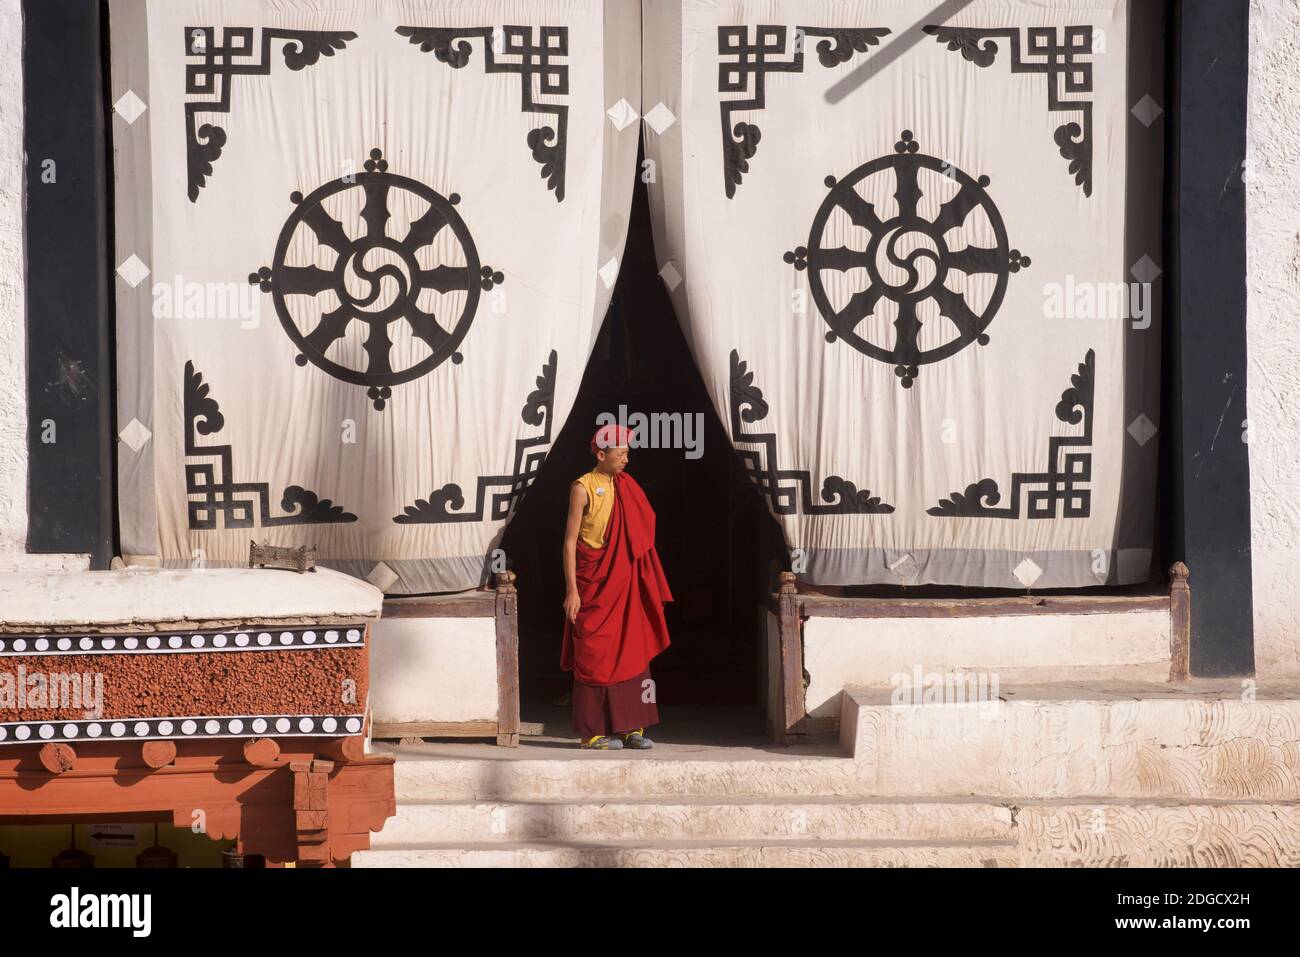 Early morning at Hemis monastery. A young monk  at the entrance to the prayer hall. On the fabric screen at the entrance above is the Dharmachakra - a typical Dharma Wheel with 8 spokes representing the Eightfold Path - The oldest, universal symbol for Buddhism. Hemis monastery, Hemis, Ladakh, Jammu and Kashmir, India. Stock Photo